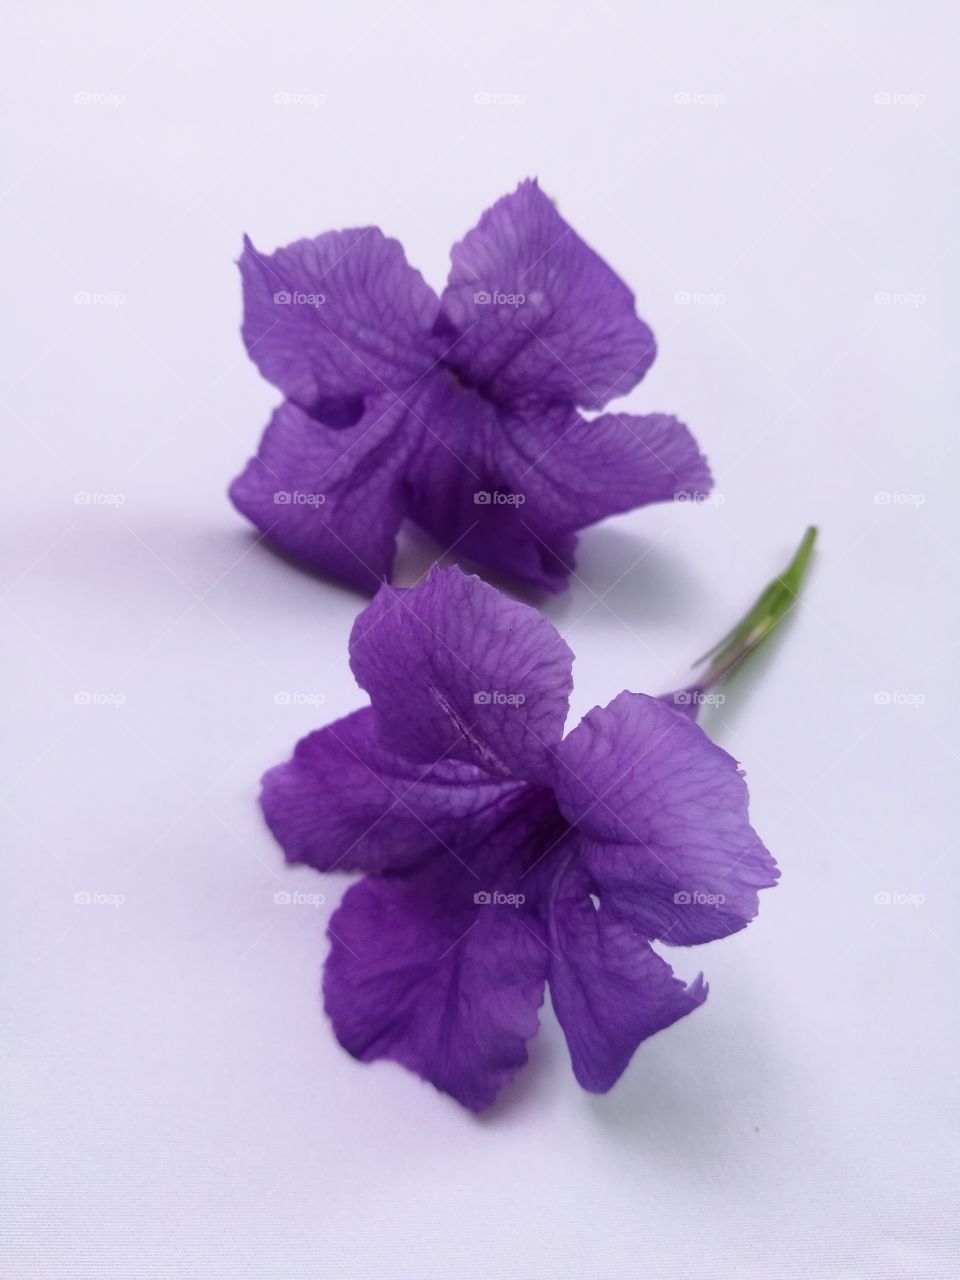 Closeup of purple flowers on white background.